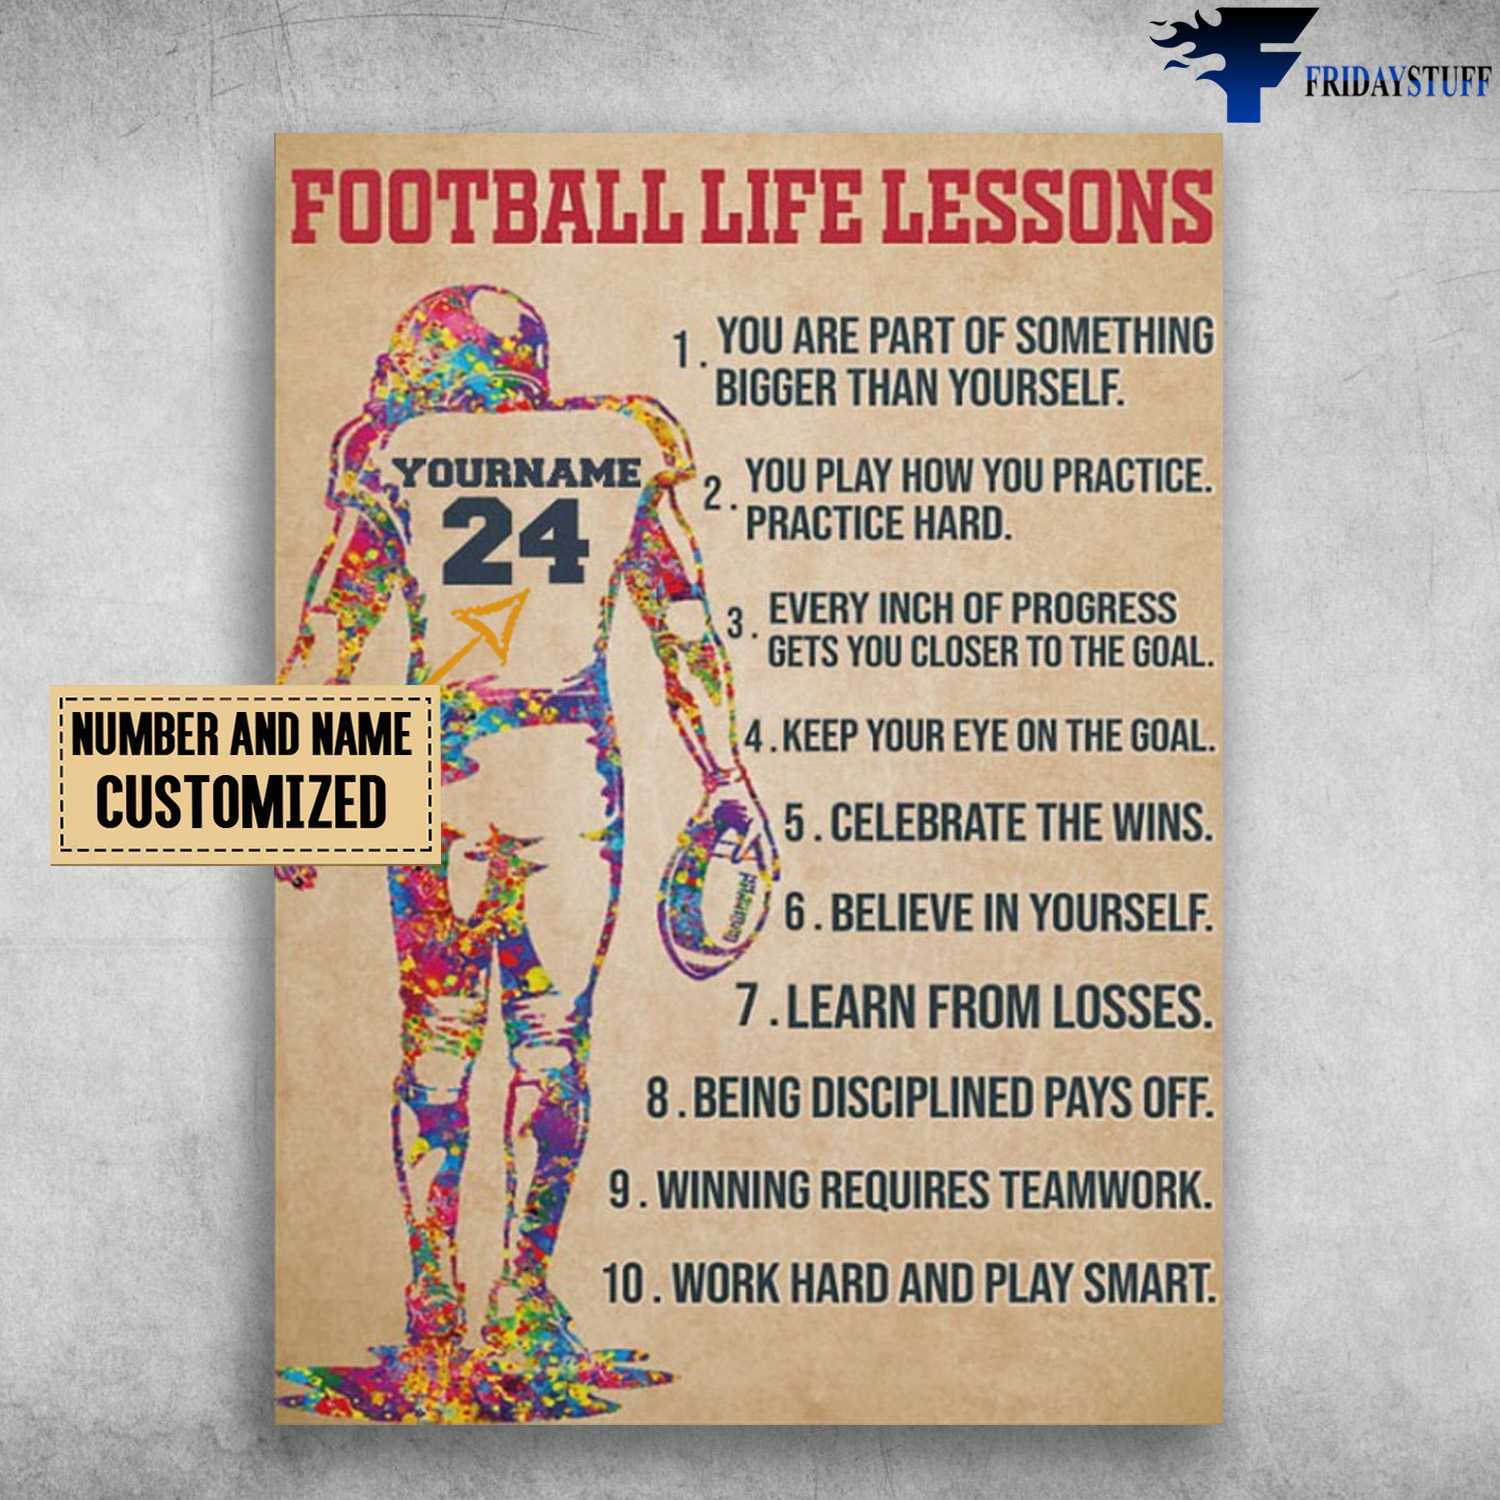 Life Really is a Game of Inches. Life-long lessons from football